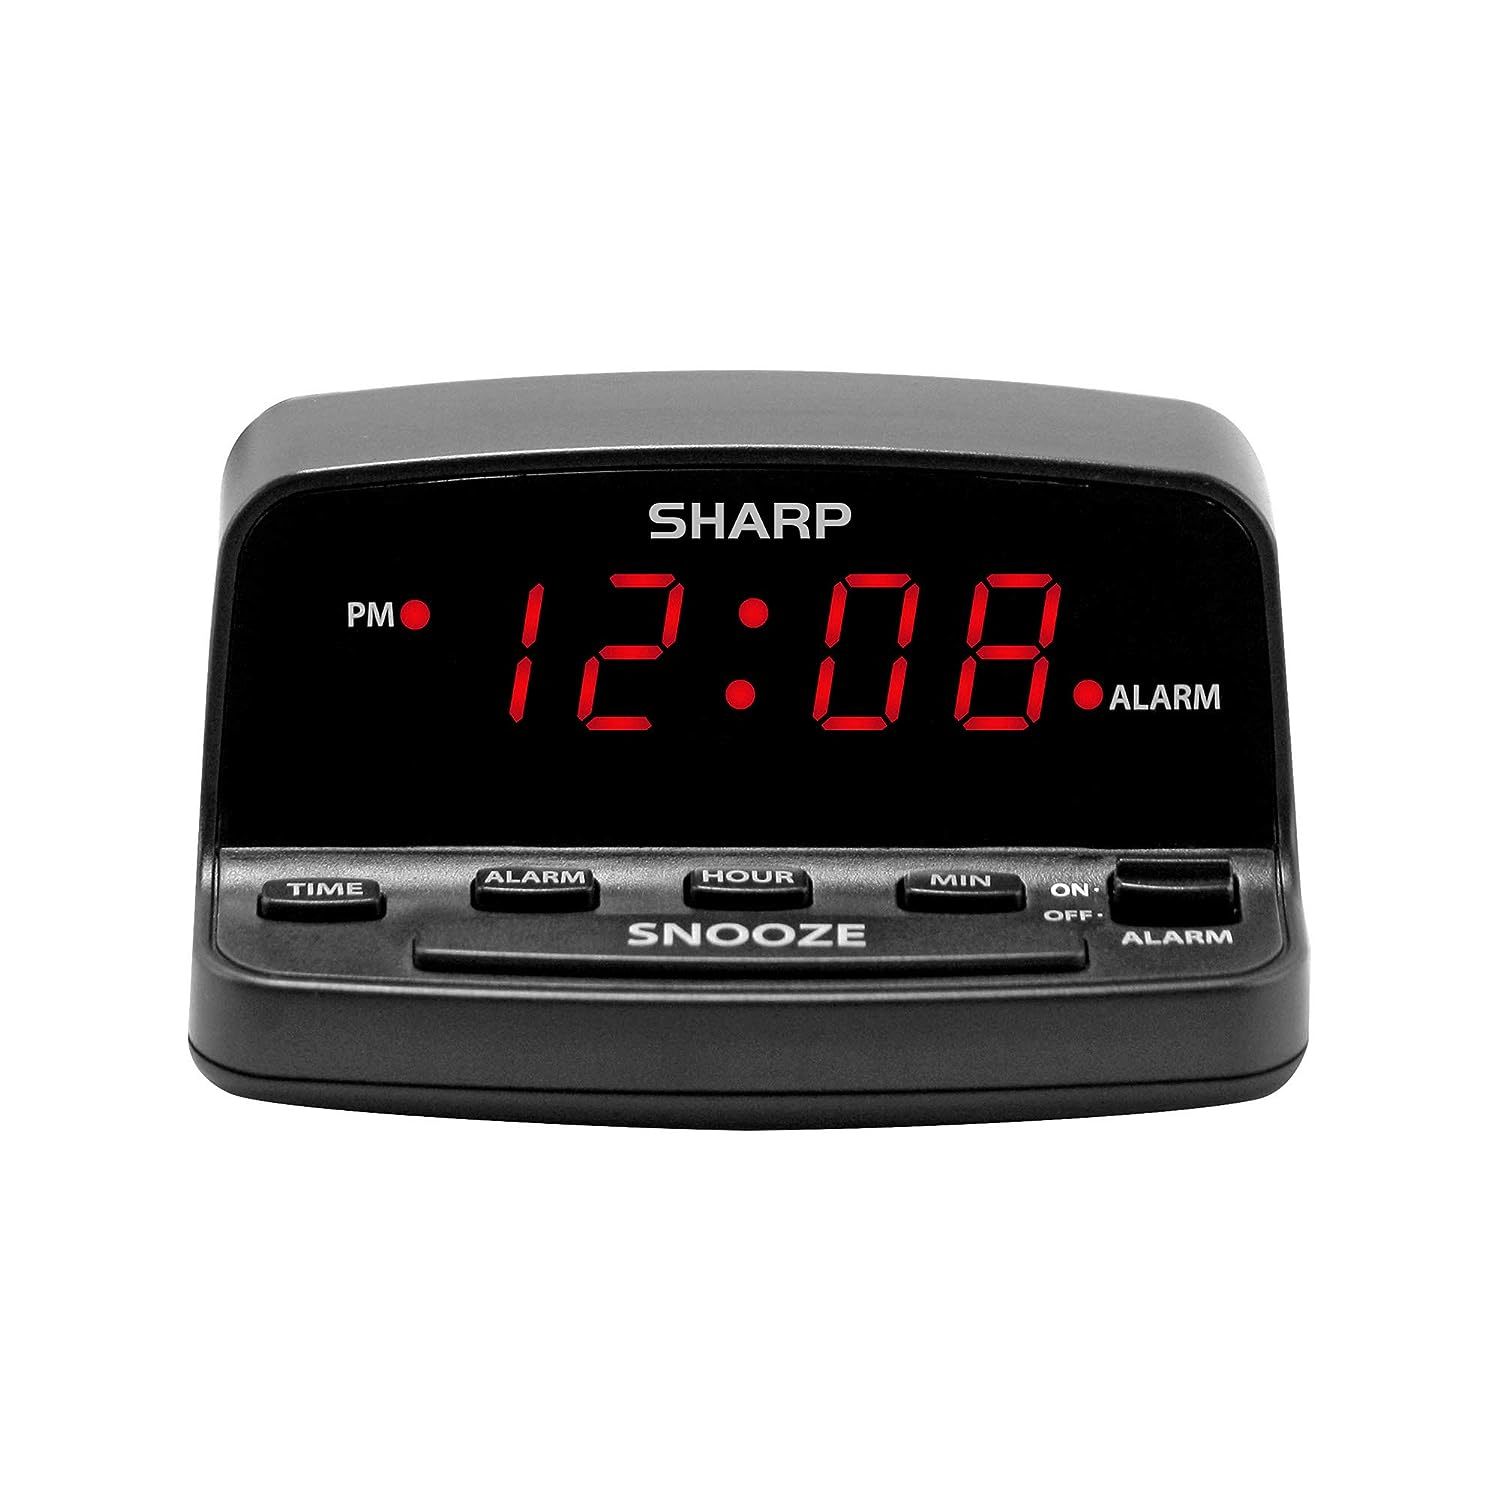 SHARP Digital Alarm Clock with Keyboard Style Controls, Battery Back-up, Easy to - $19.99